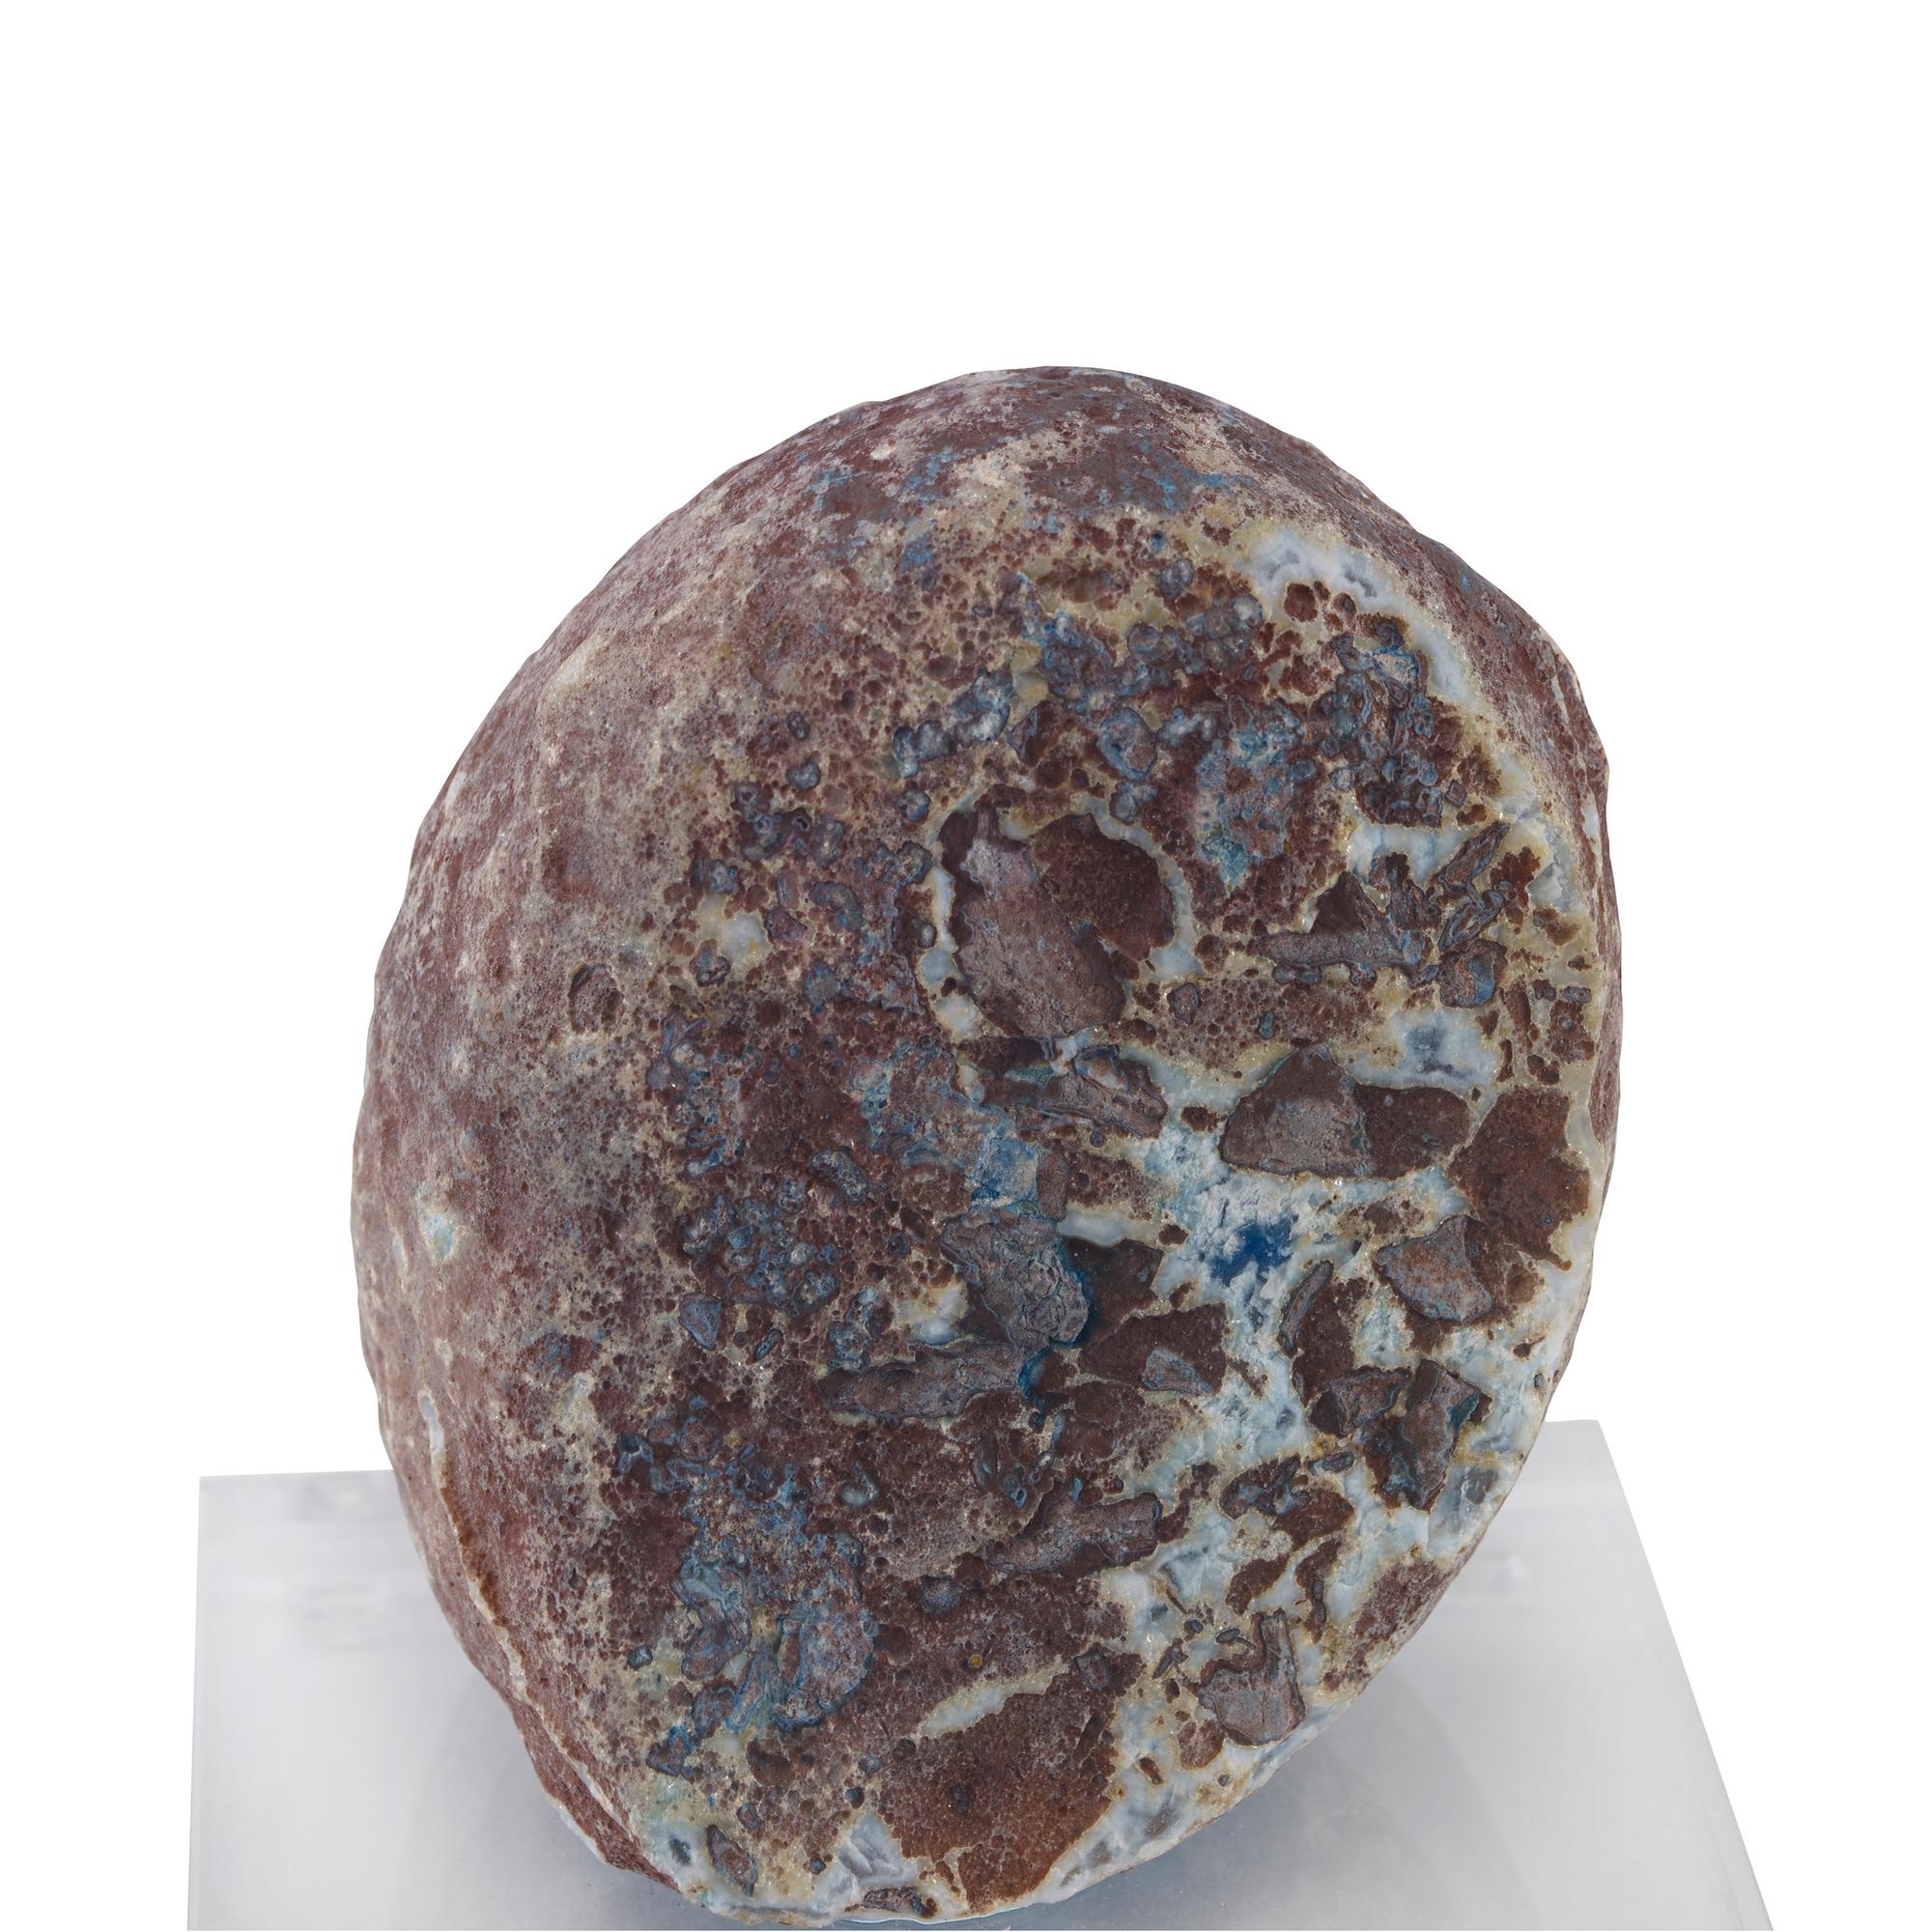 A blue agate geode mounted on a clear acrylic base. Due to the natural material, variation in size, shape, and color is to be expected.
       